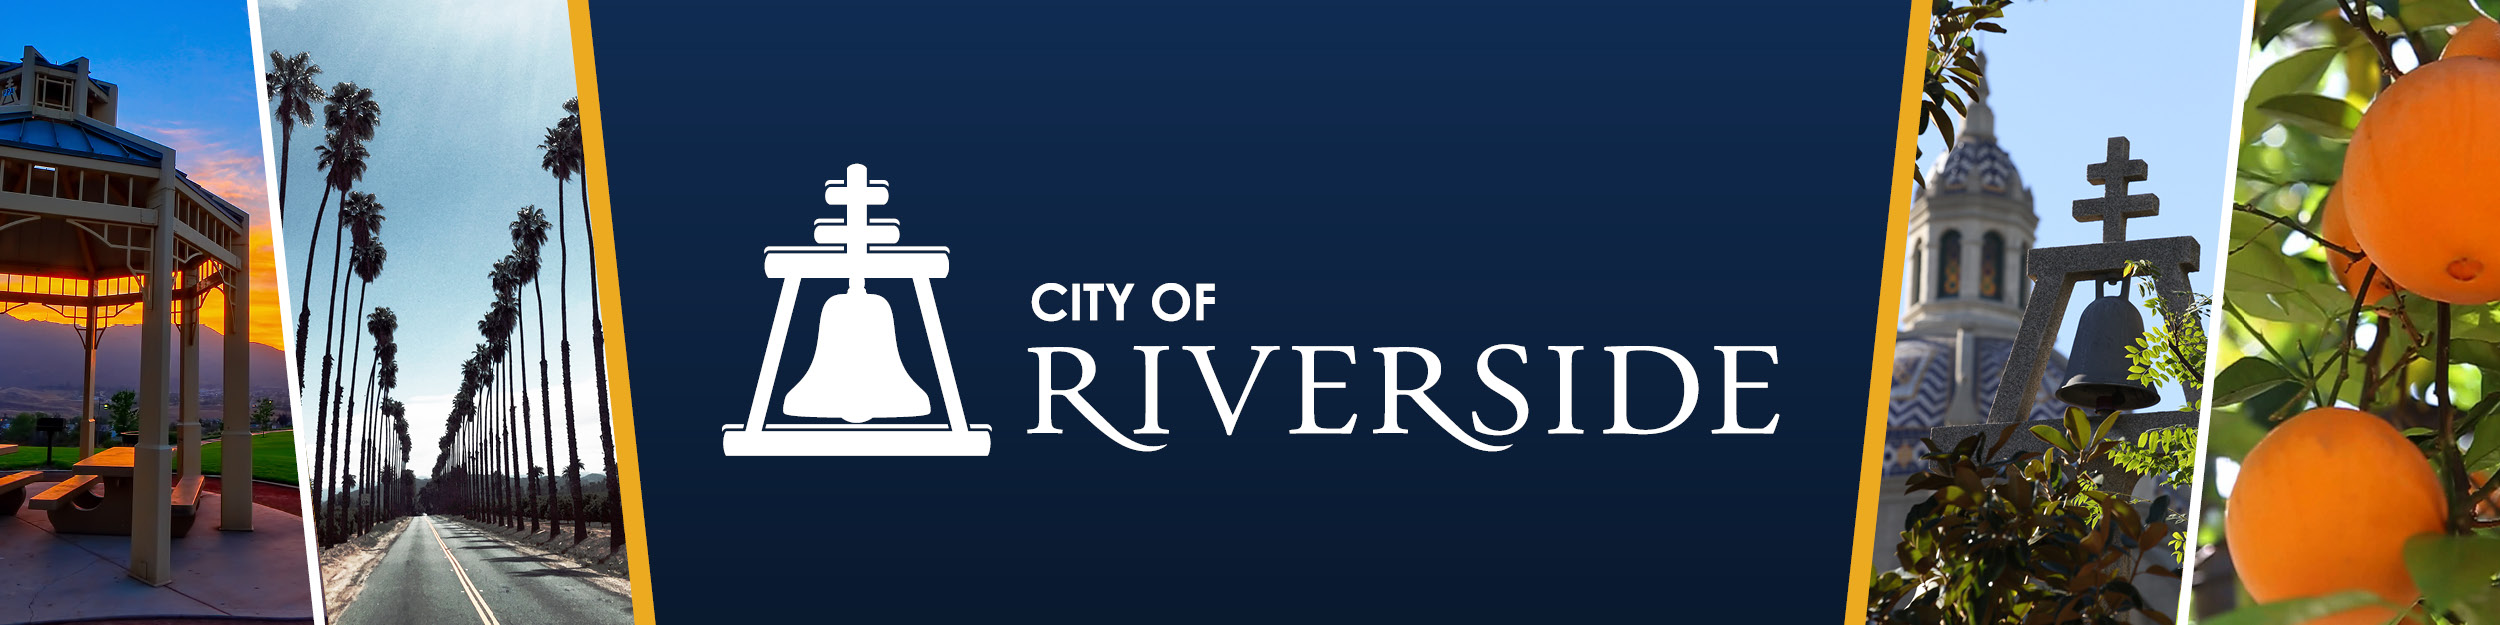 City of Riverside Email Subscription 